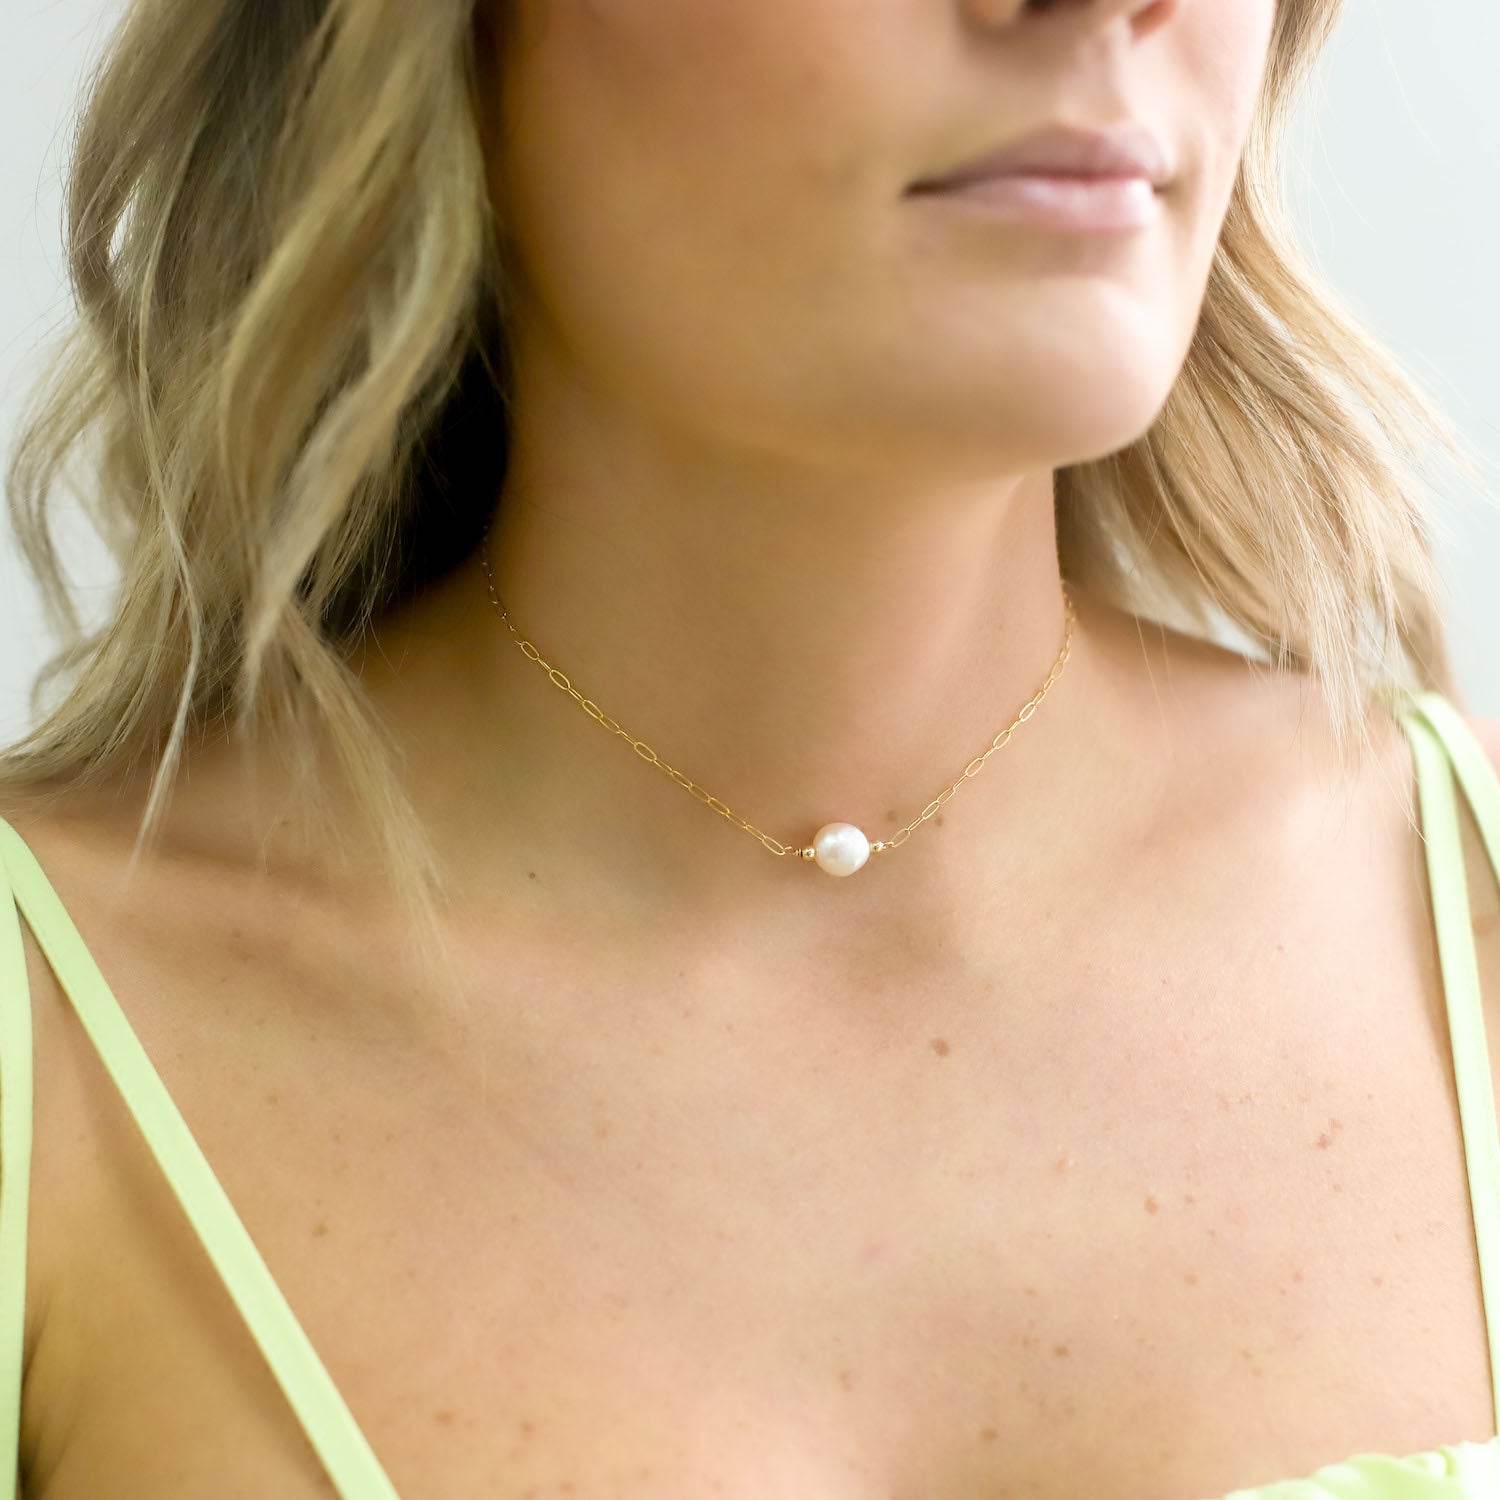 100% original Pearl Choker 2-3 mm • Thin Pearl Choker Necklace • Dainty  Freshwater Pearl Necklace • Wedding, Bridal Jewelry • Bridesmaid Gifts |  www.firstsaveholdings.com